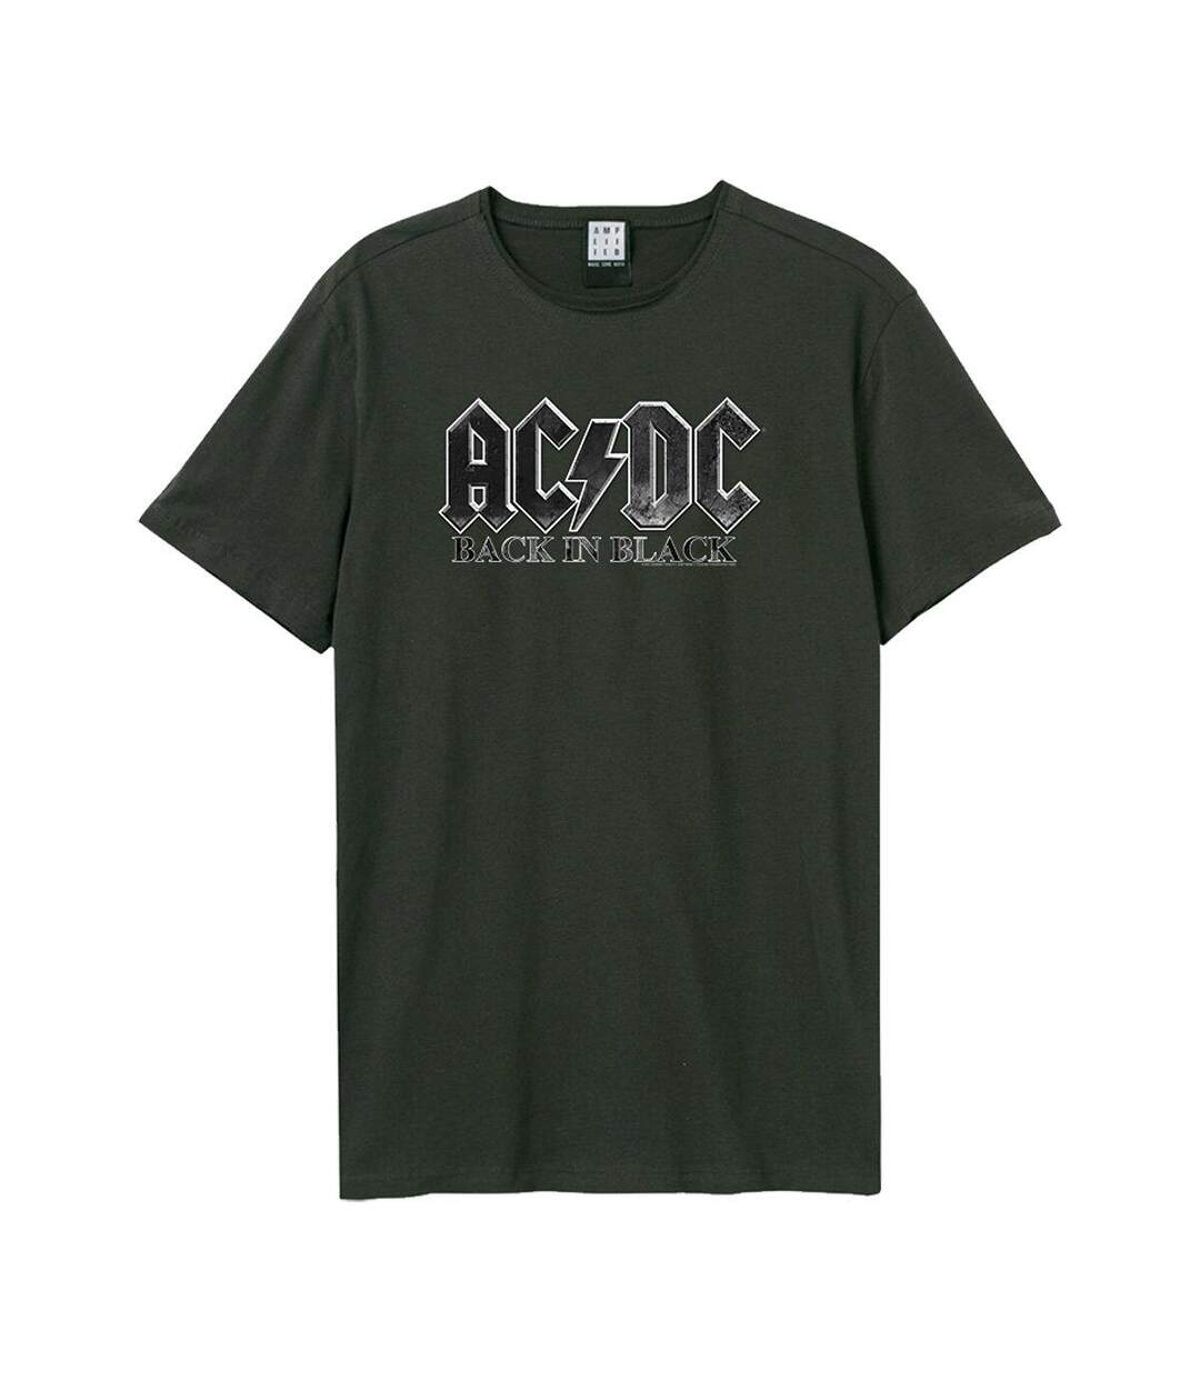 Amplified - T-shirt BACK IN BLACK - Adulte (Anthracite) - UTGD620